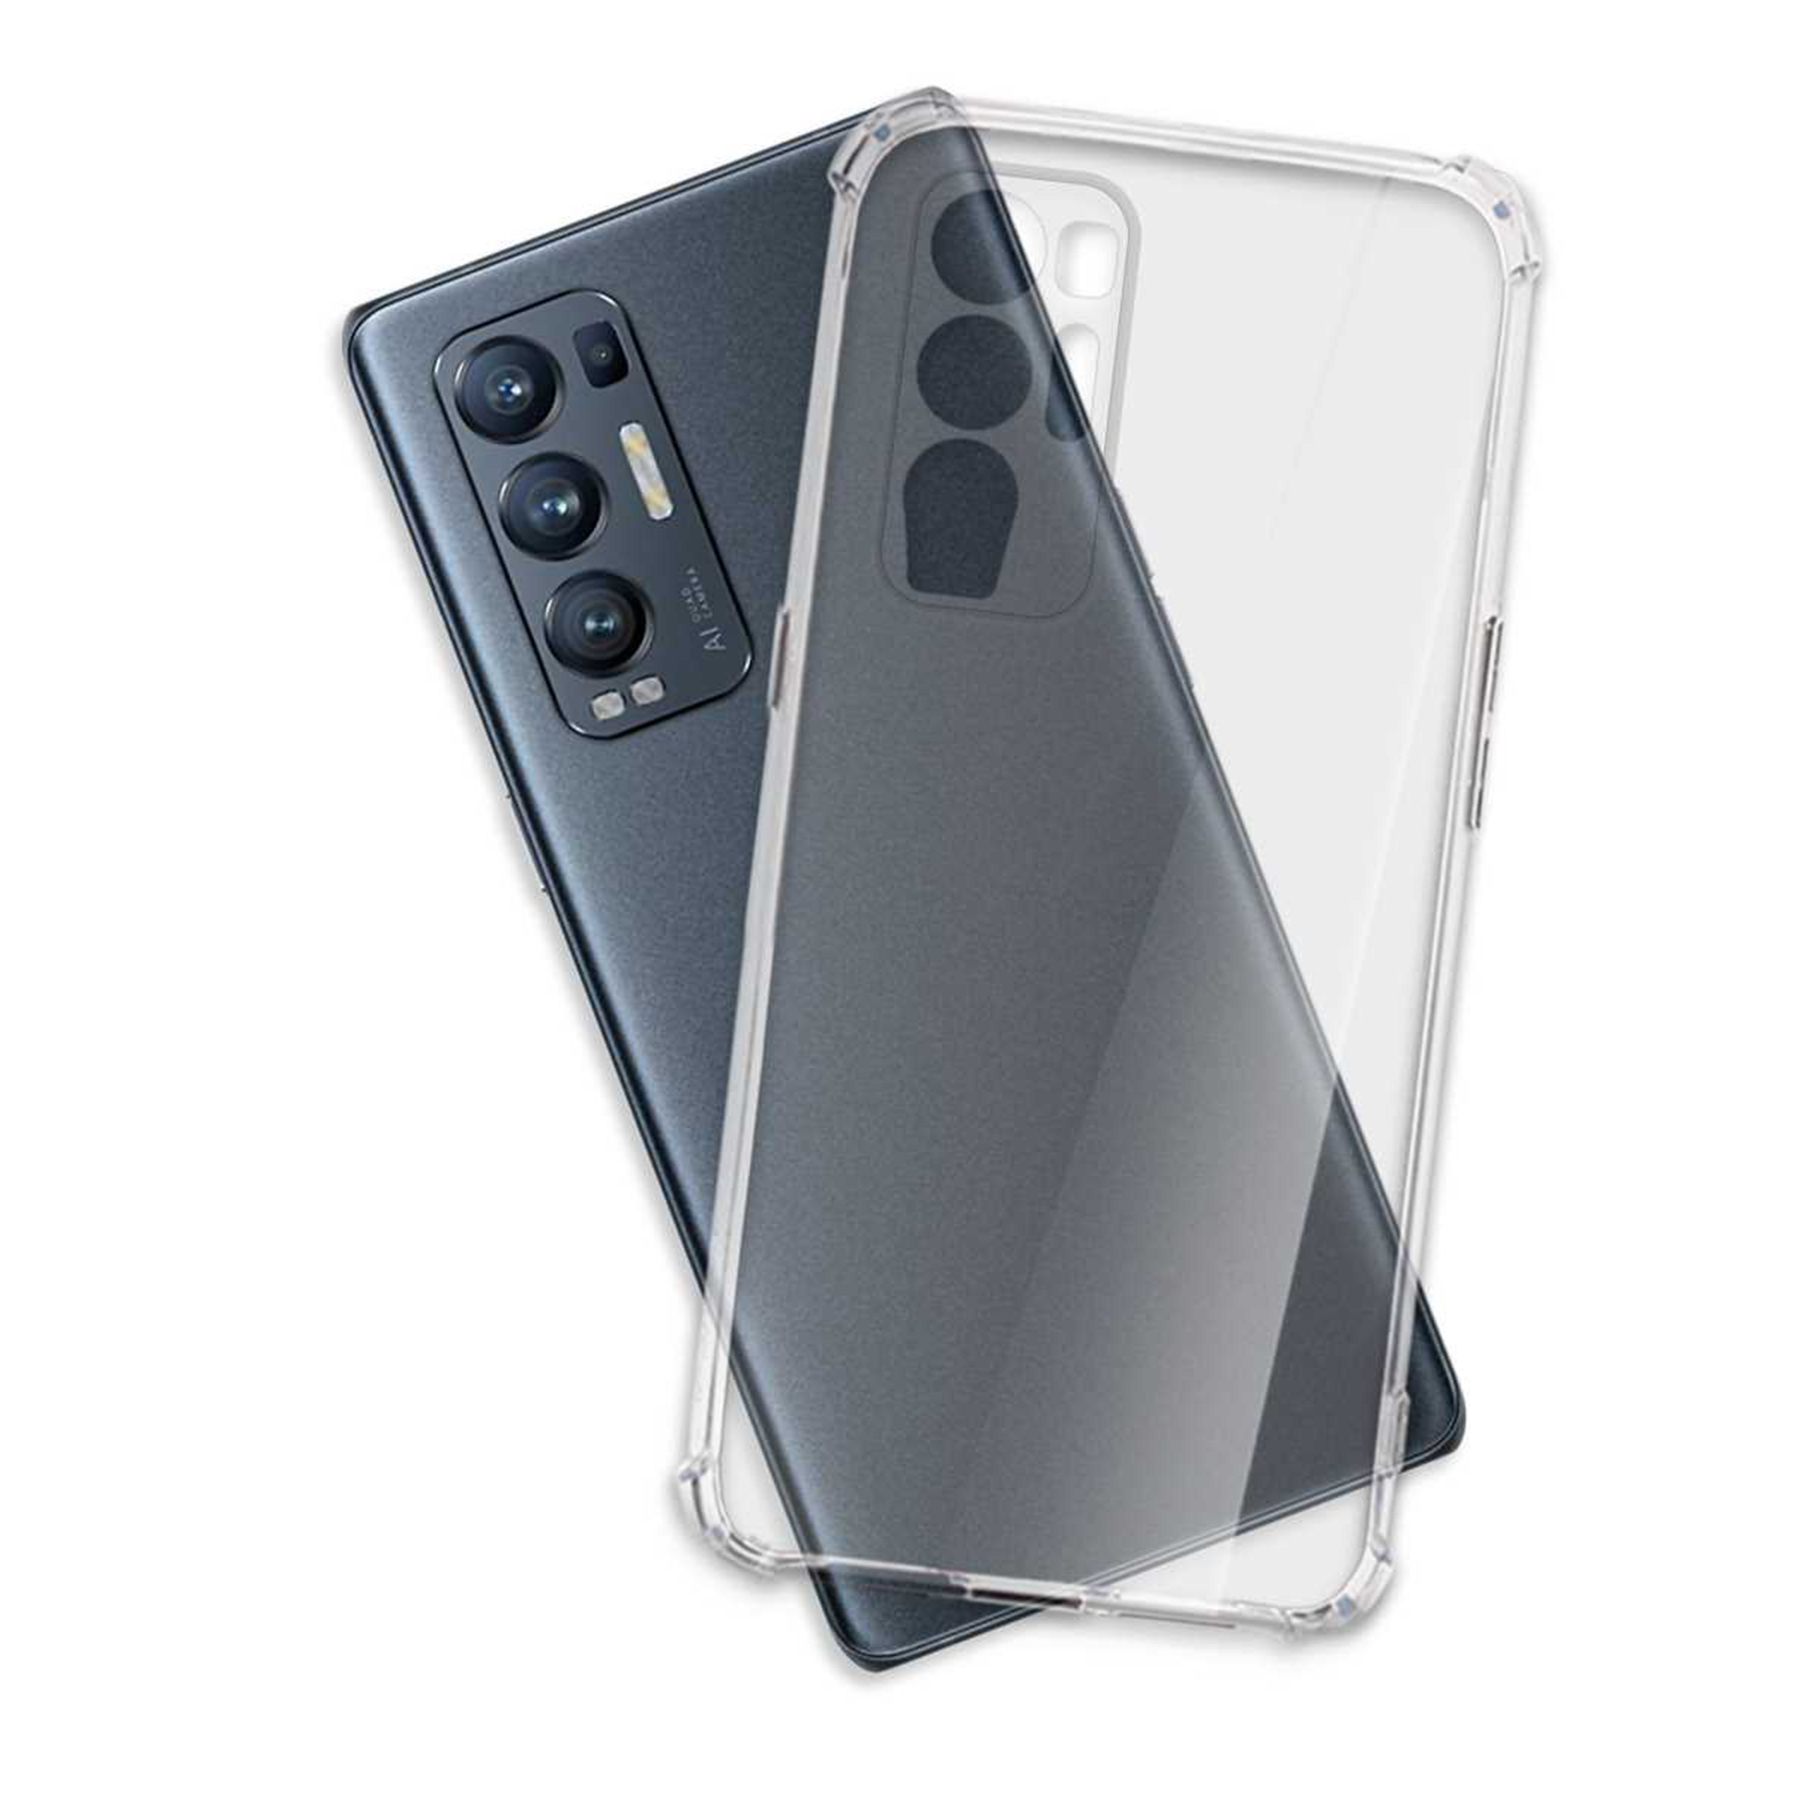 5 Plus MTB Clear Backcover, Reno ENERGY X3 MORE 5G, Case, Find Armor Oppo, Pro Neo, Transparent